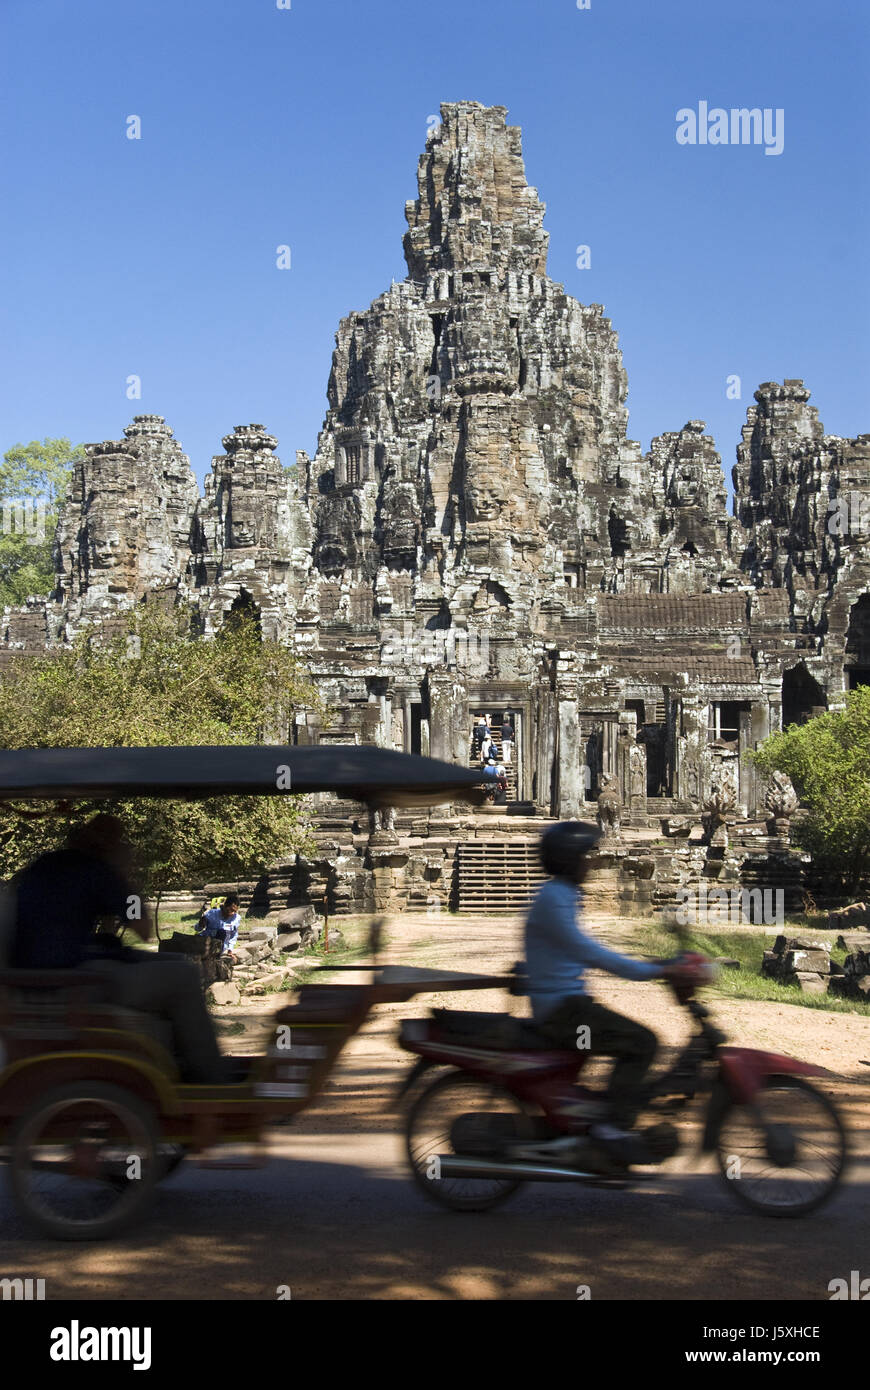 Motorcycles pass by the Bayon, a Buddhist temple decorated with massive stone faces, Siem Reap, Cambodia. Stock Photo